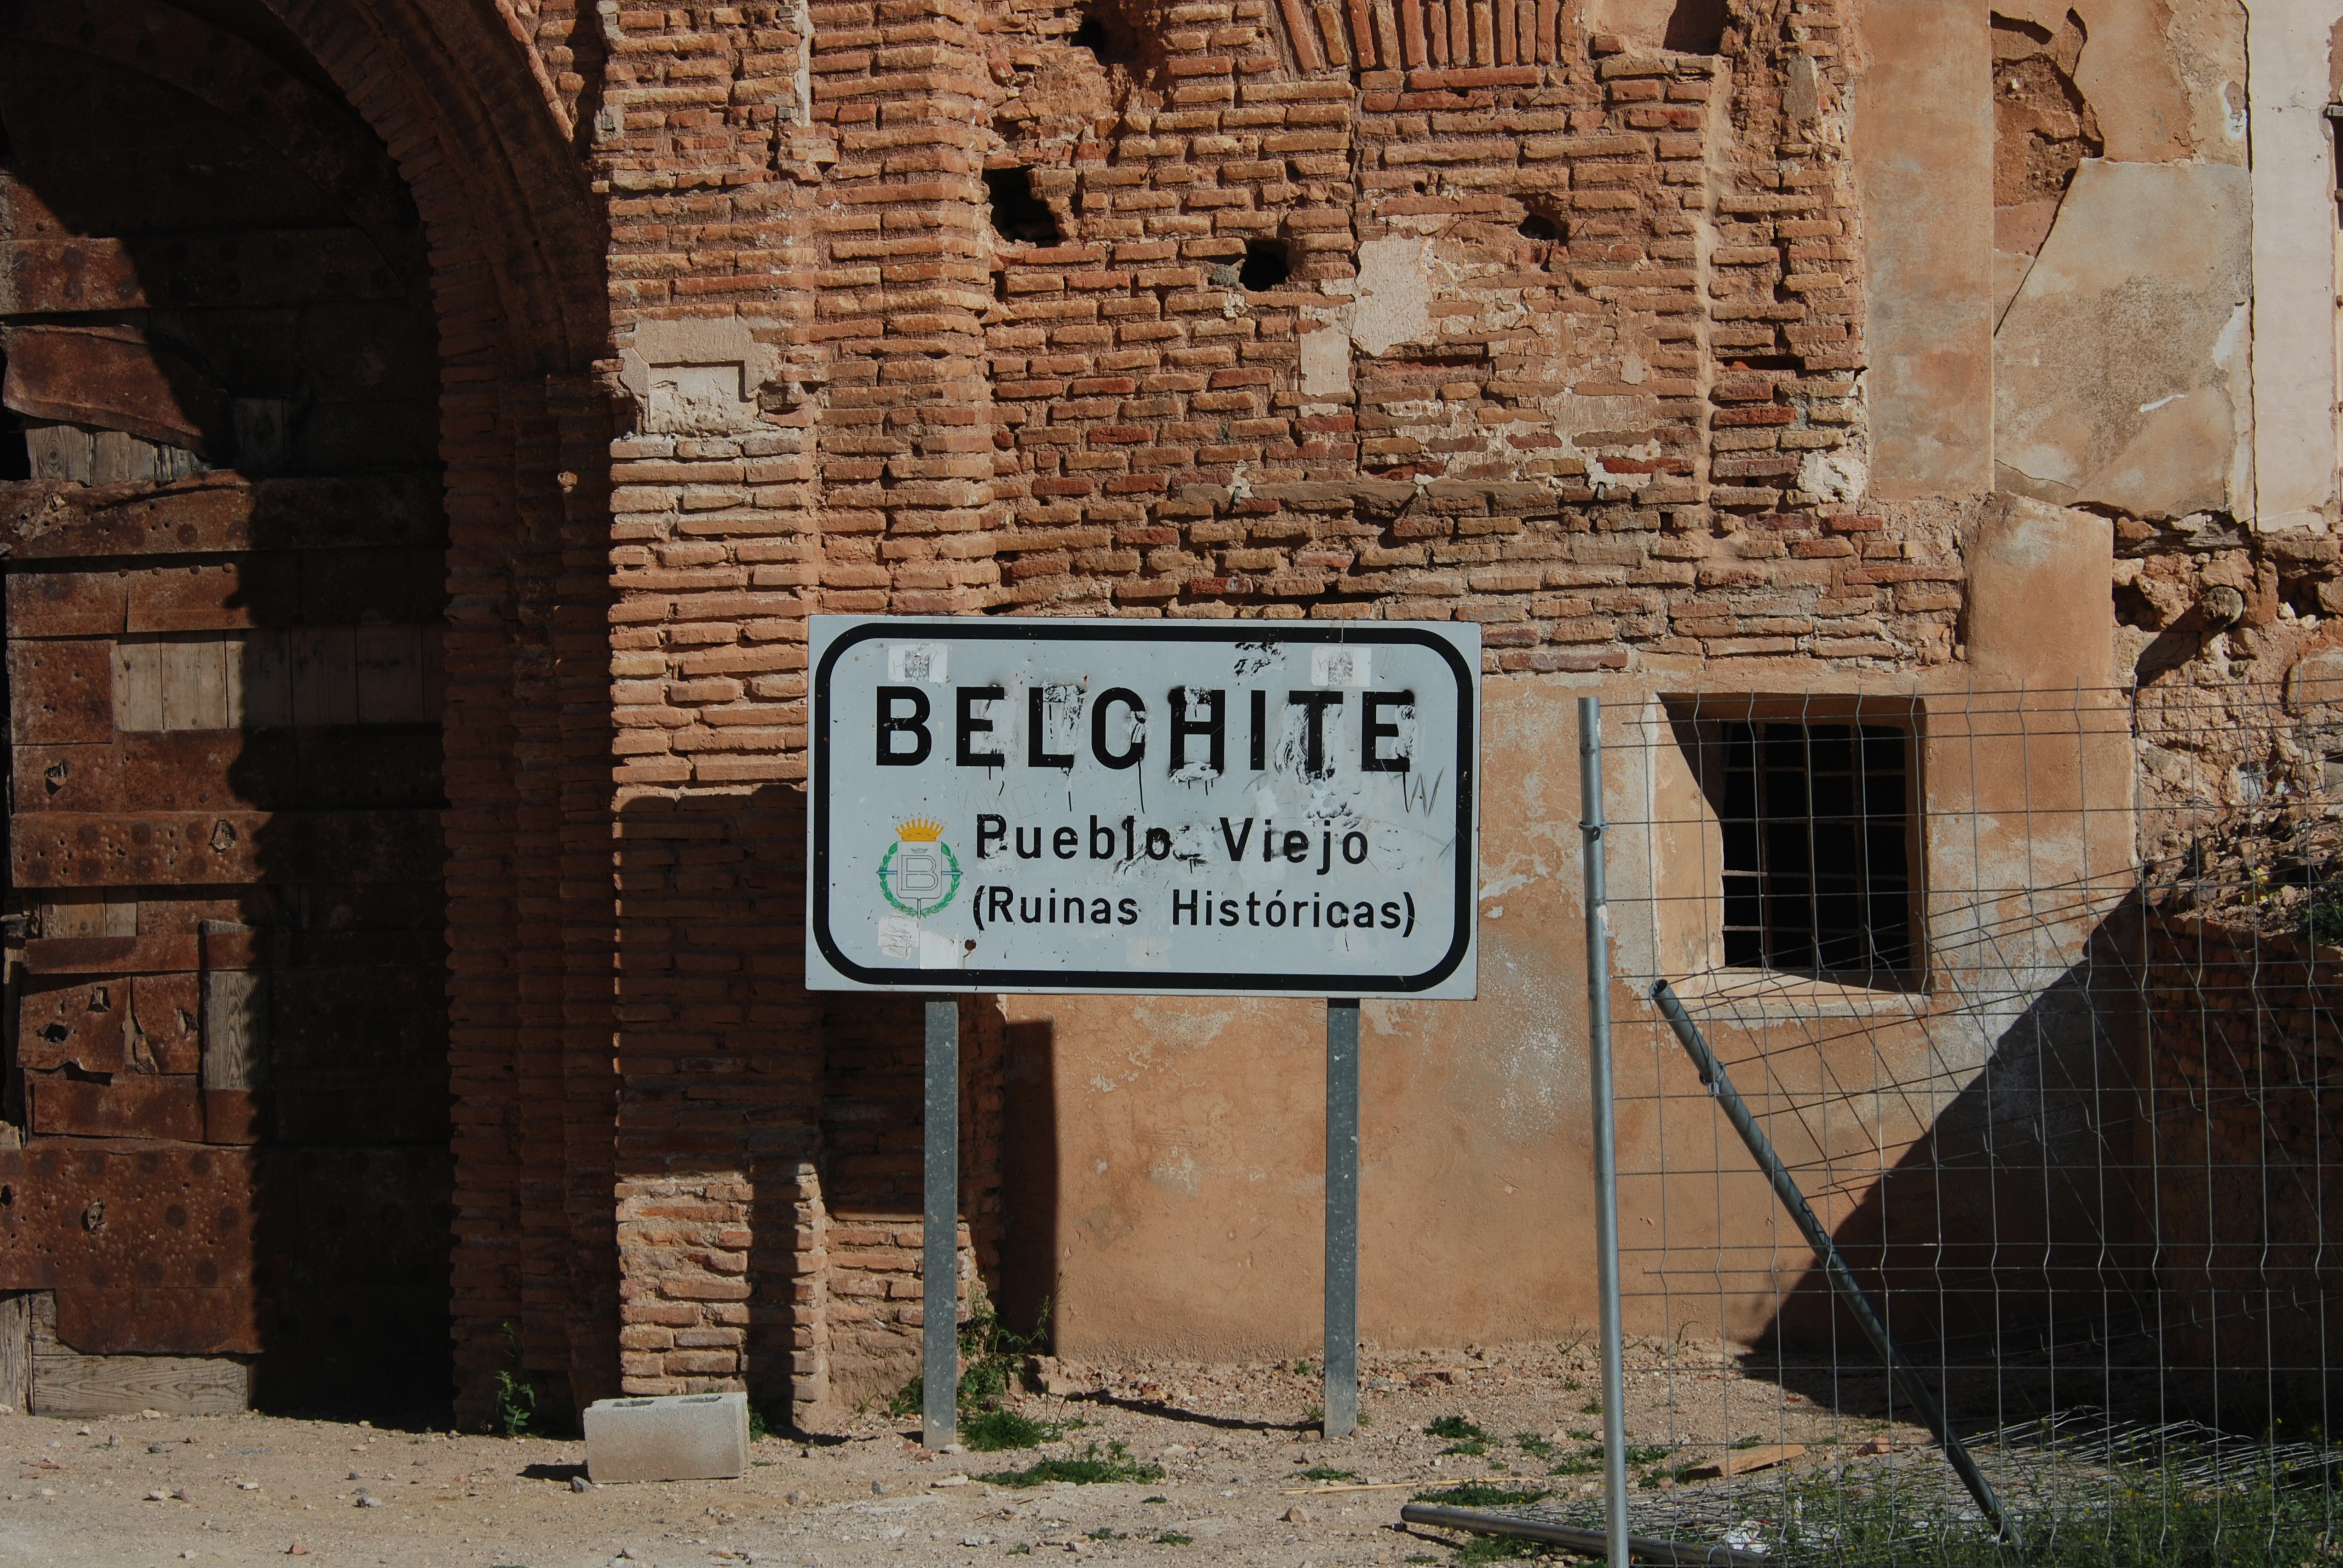 Click picture to see more of Belchite.